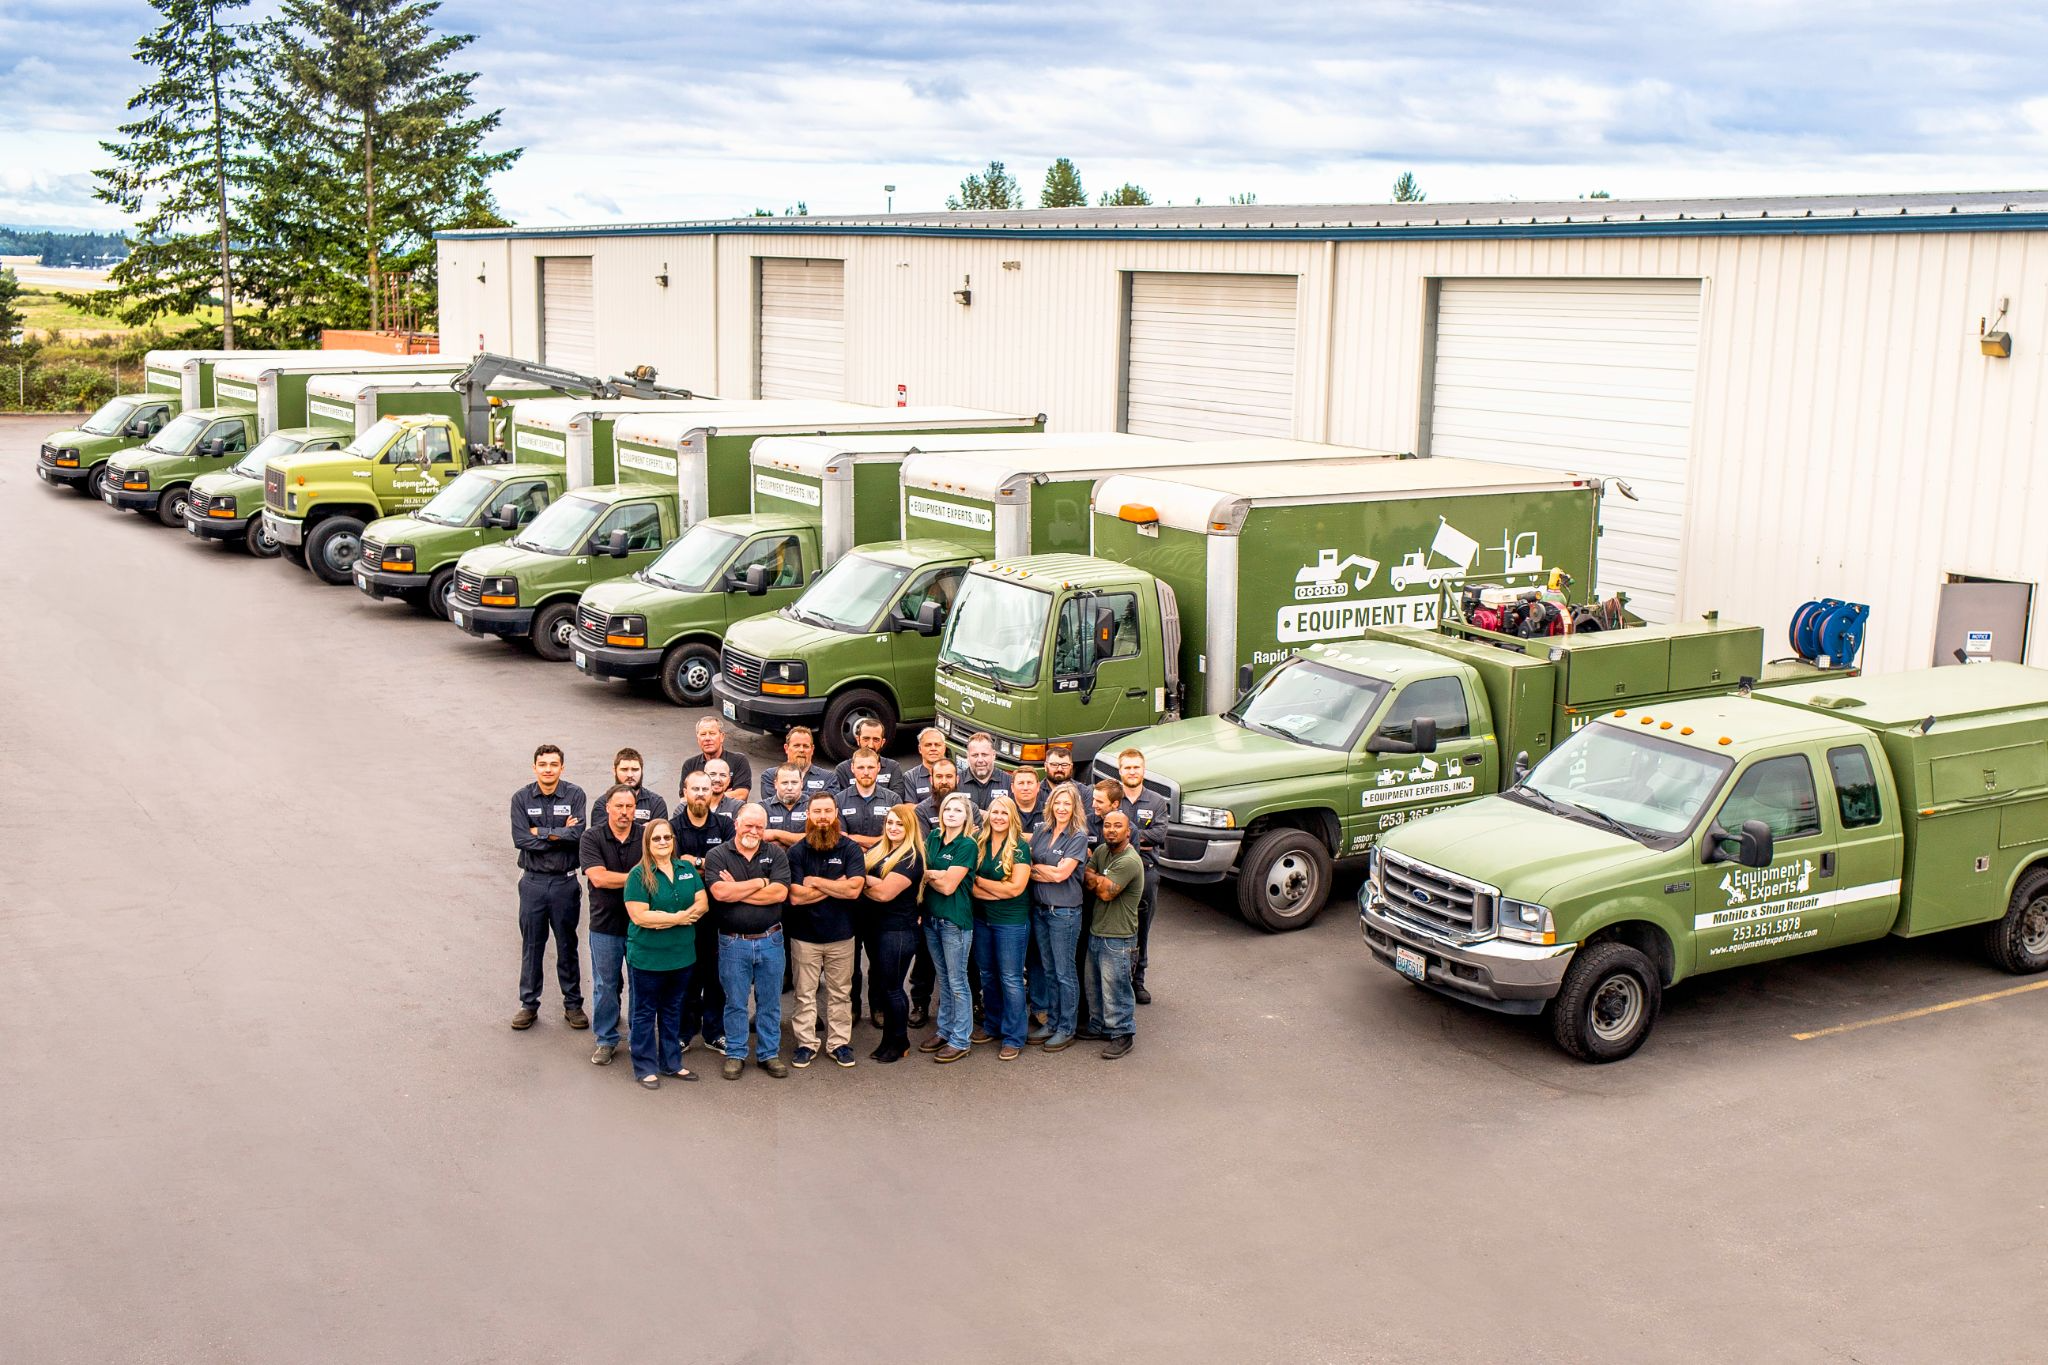 Equipment Experts, Inc. team with crossed arms in front of a fleet of trucks